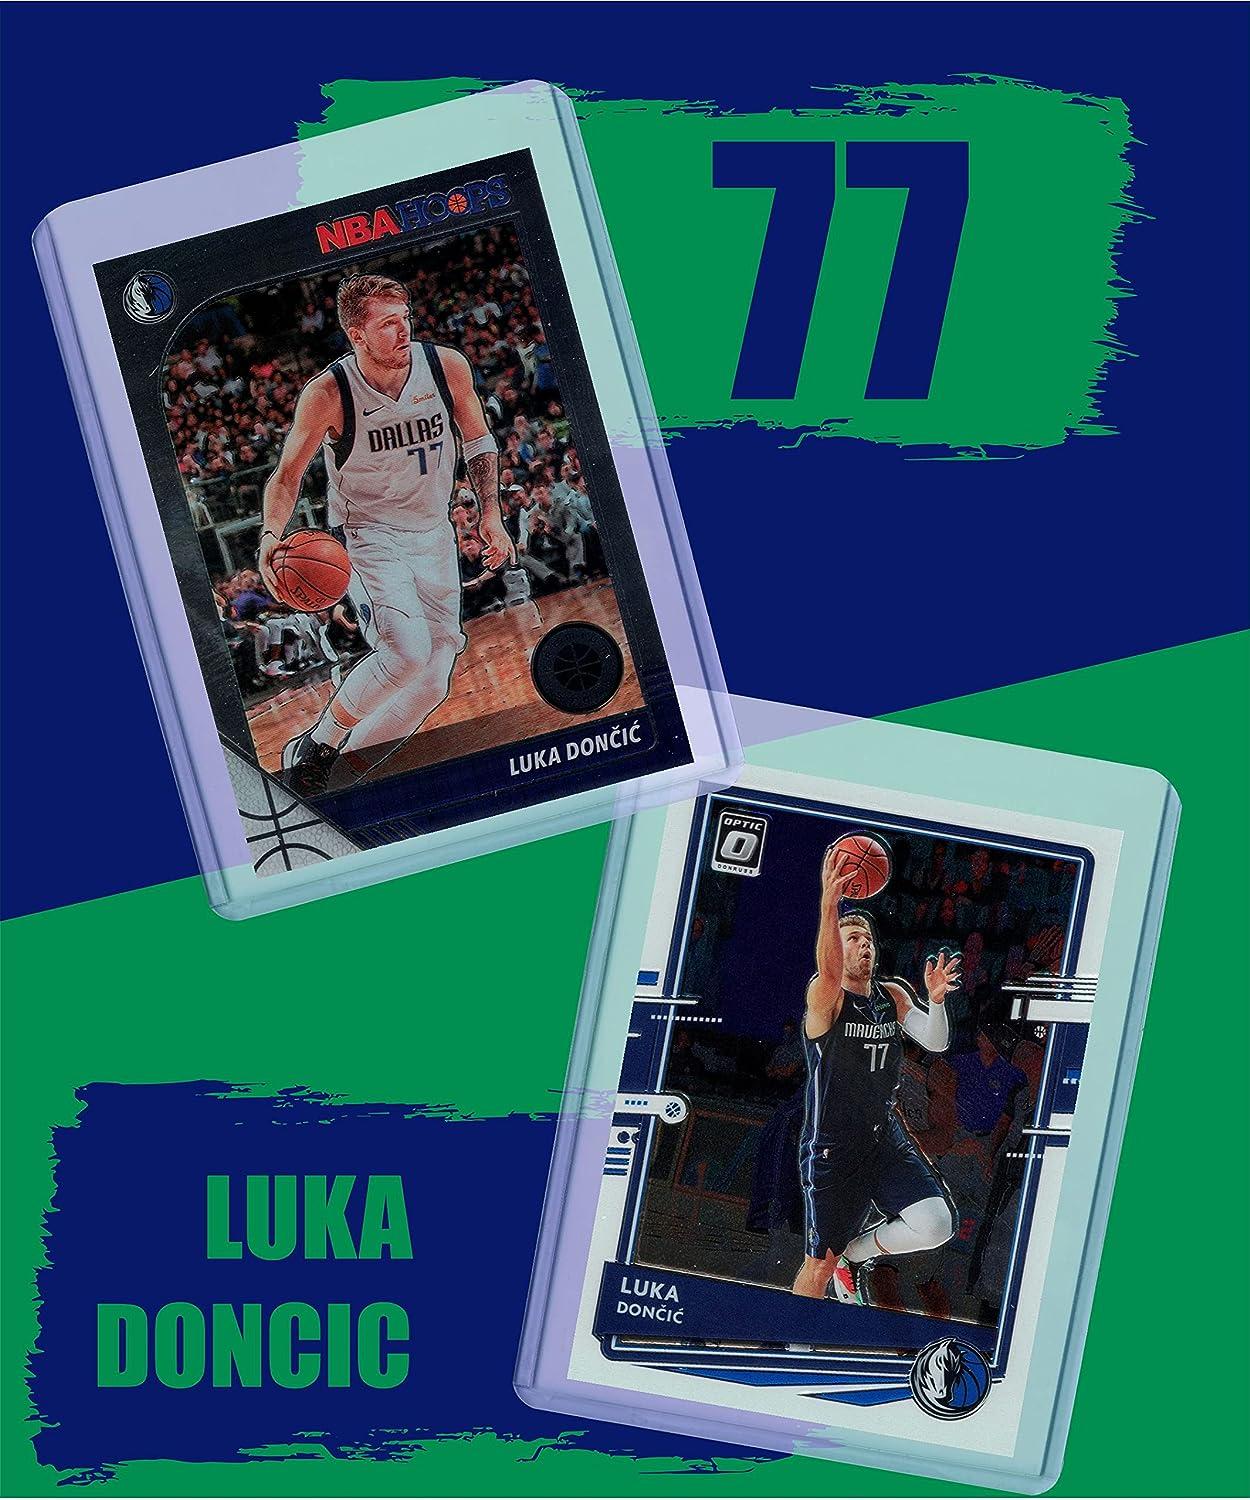 The Catologue: Is Luka Doncic the best young player in the NBA